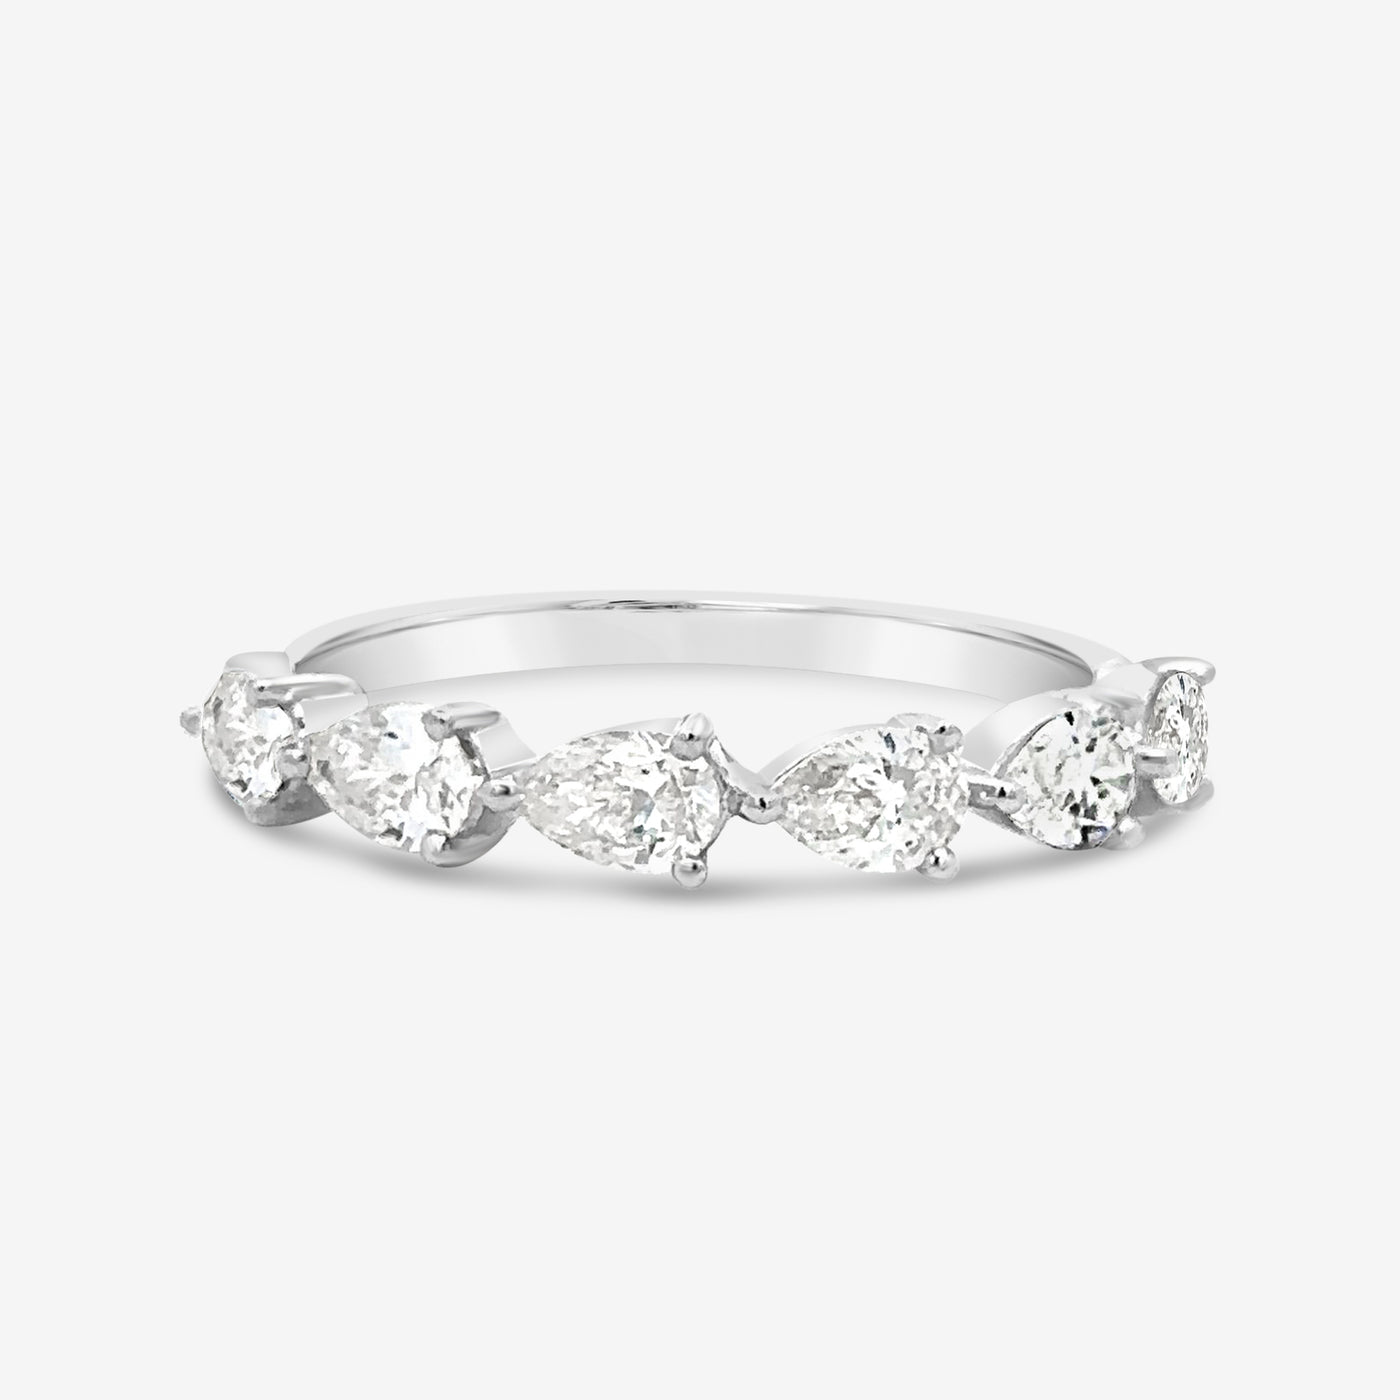 East-West Pear Shaped Diamond Ring